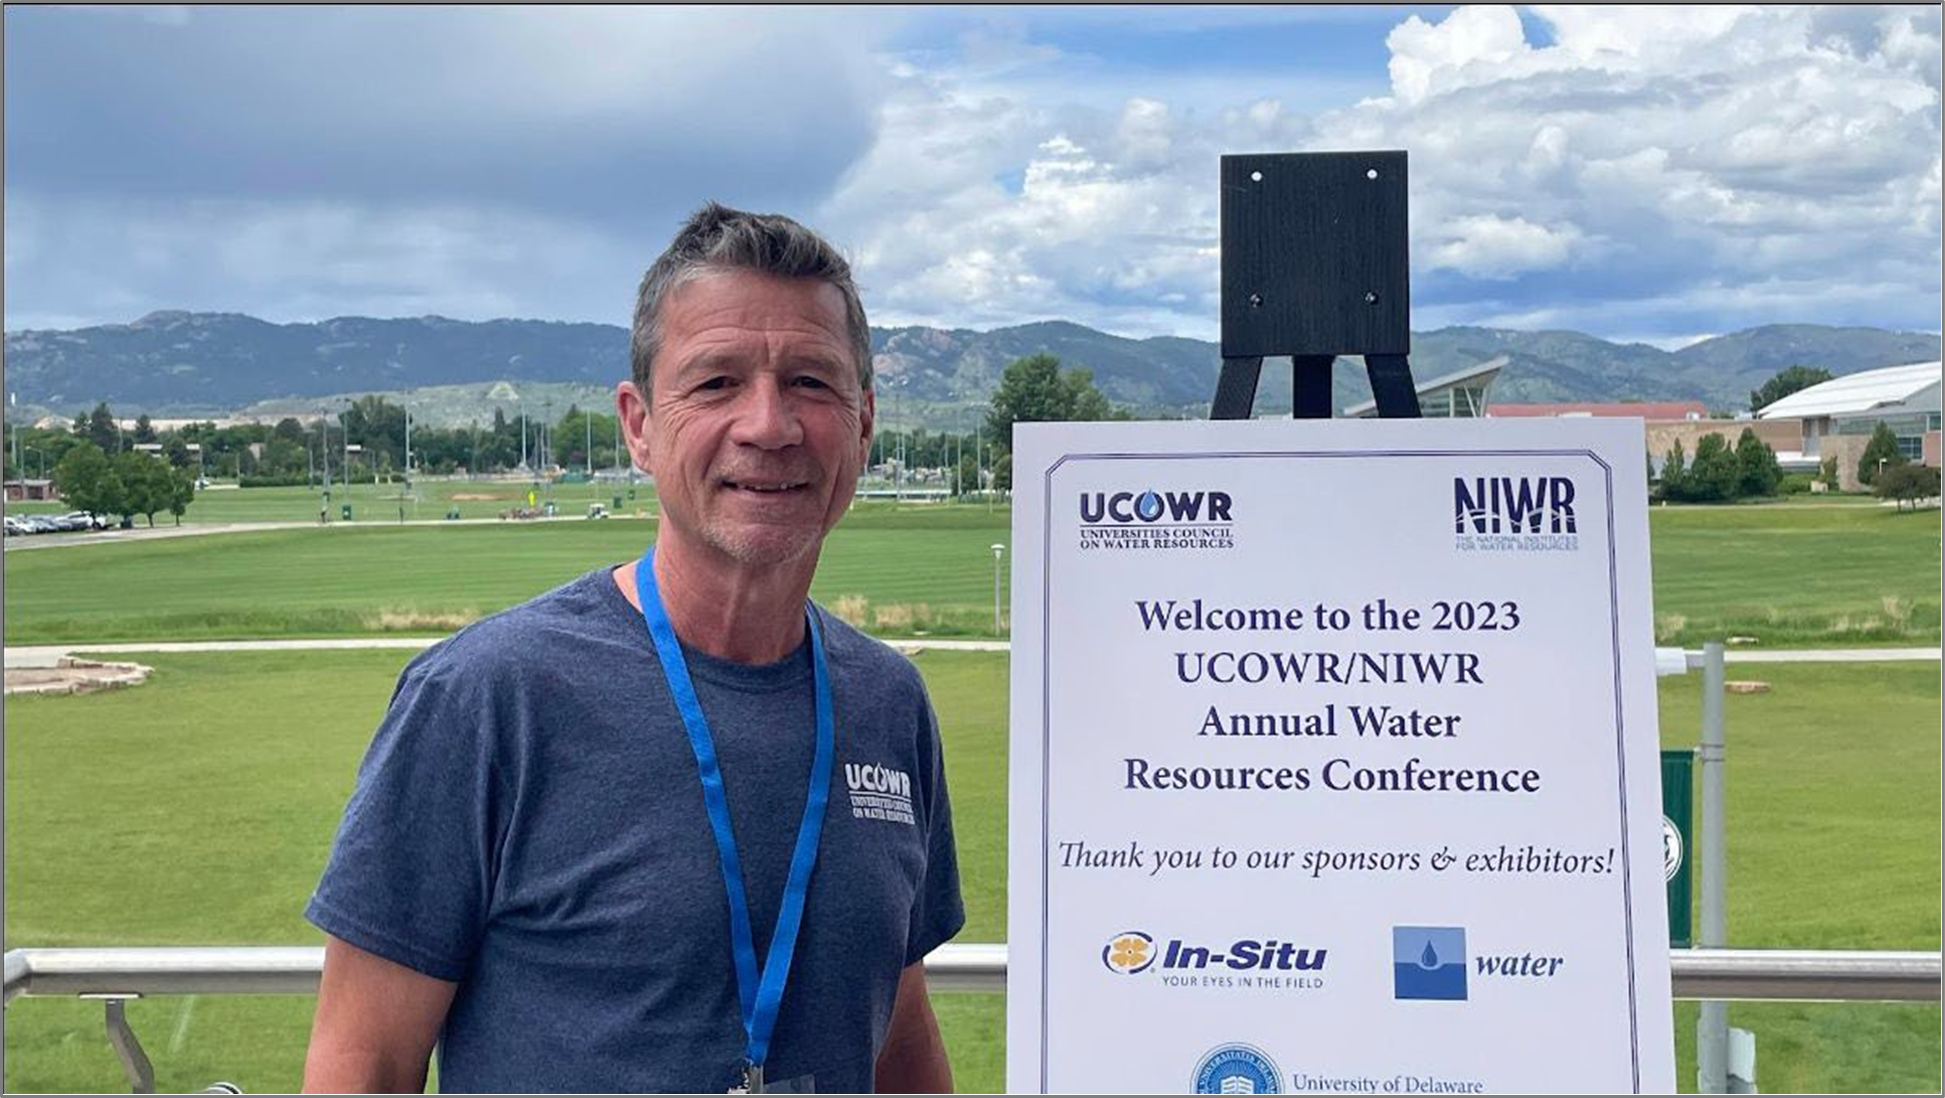 Newly inducted President Gerald Kauffman at the UCOWR Annual Conference on June 14, 2023, at Colorado State University in Ft. Collins, CO.